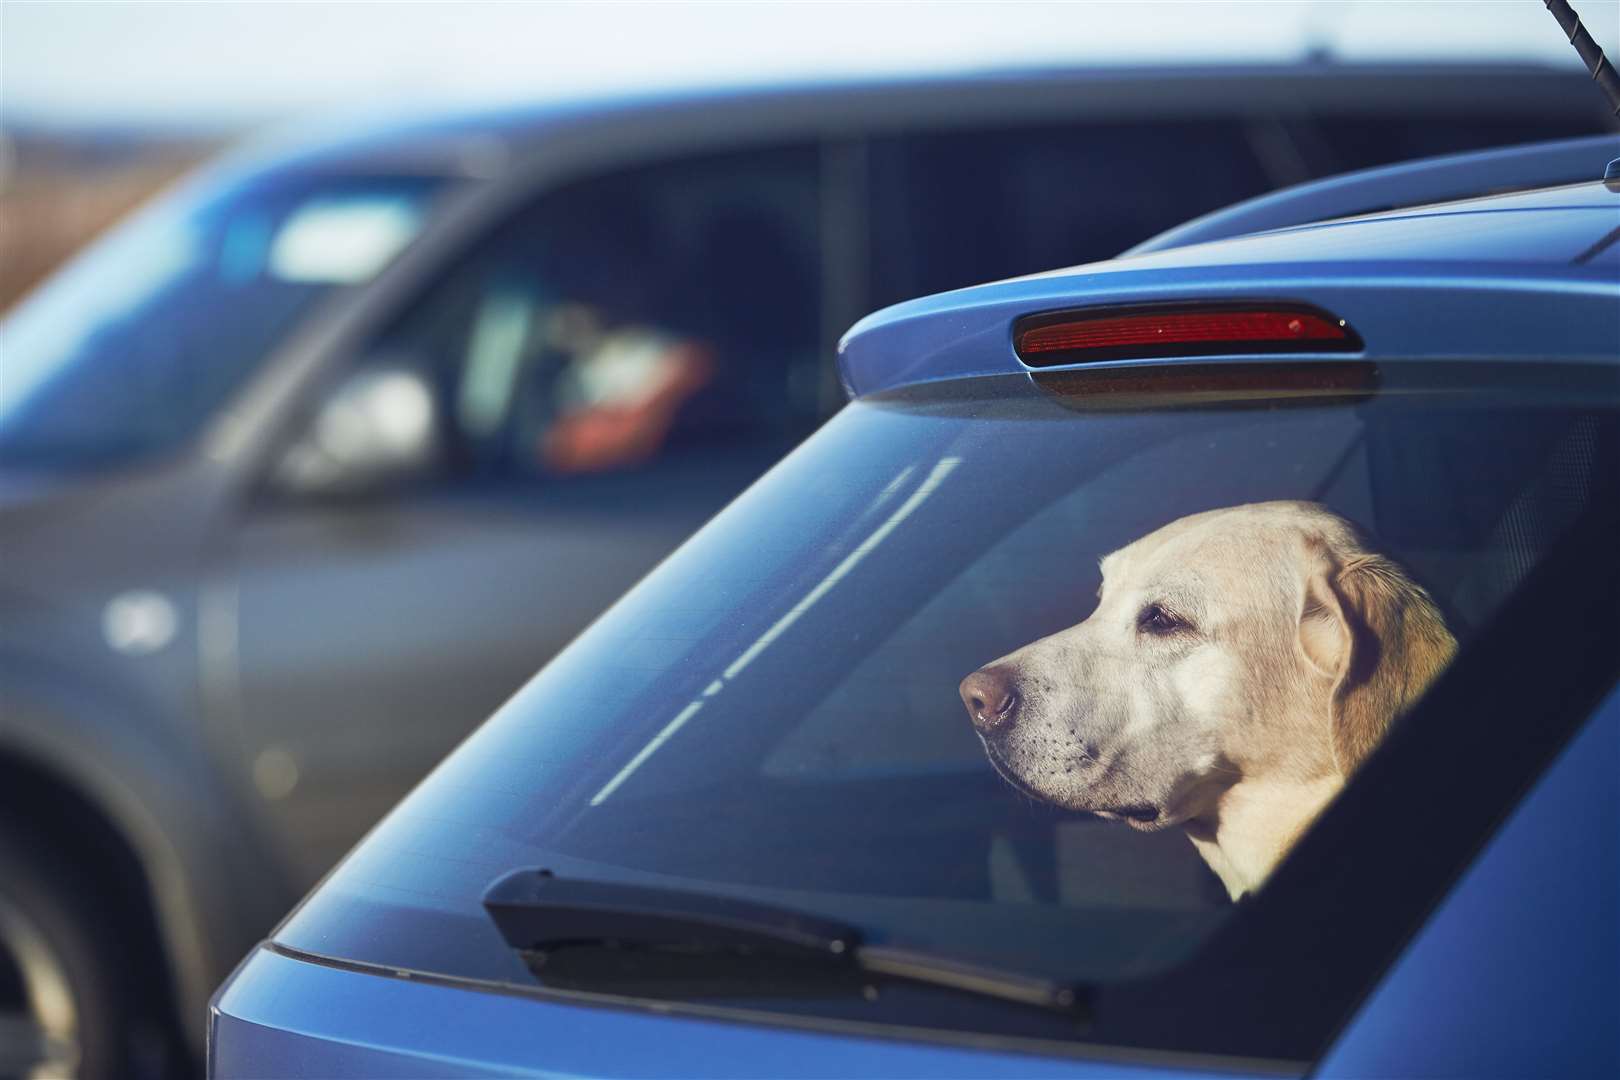 It can be dangerous to leave a dog in a hot car even for a very short space of time.